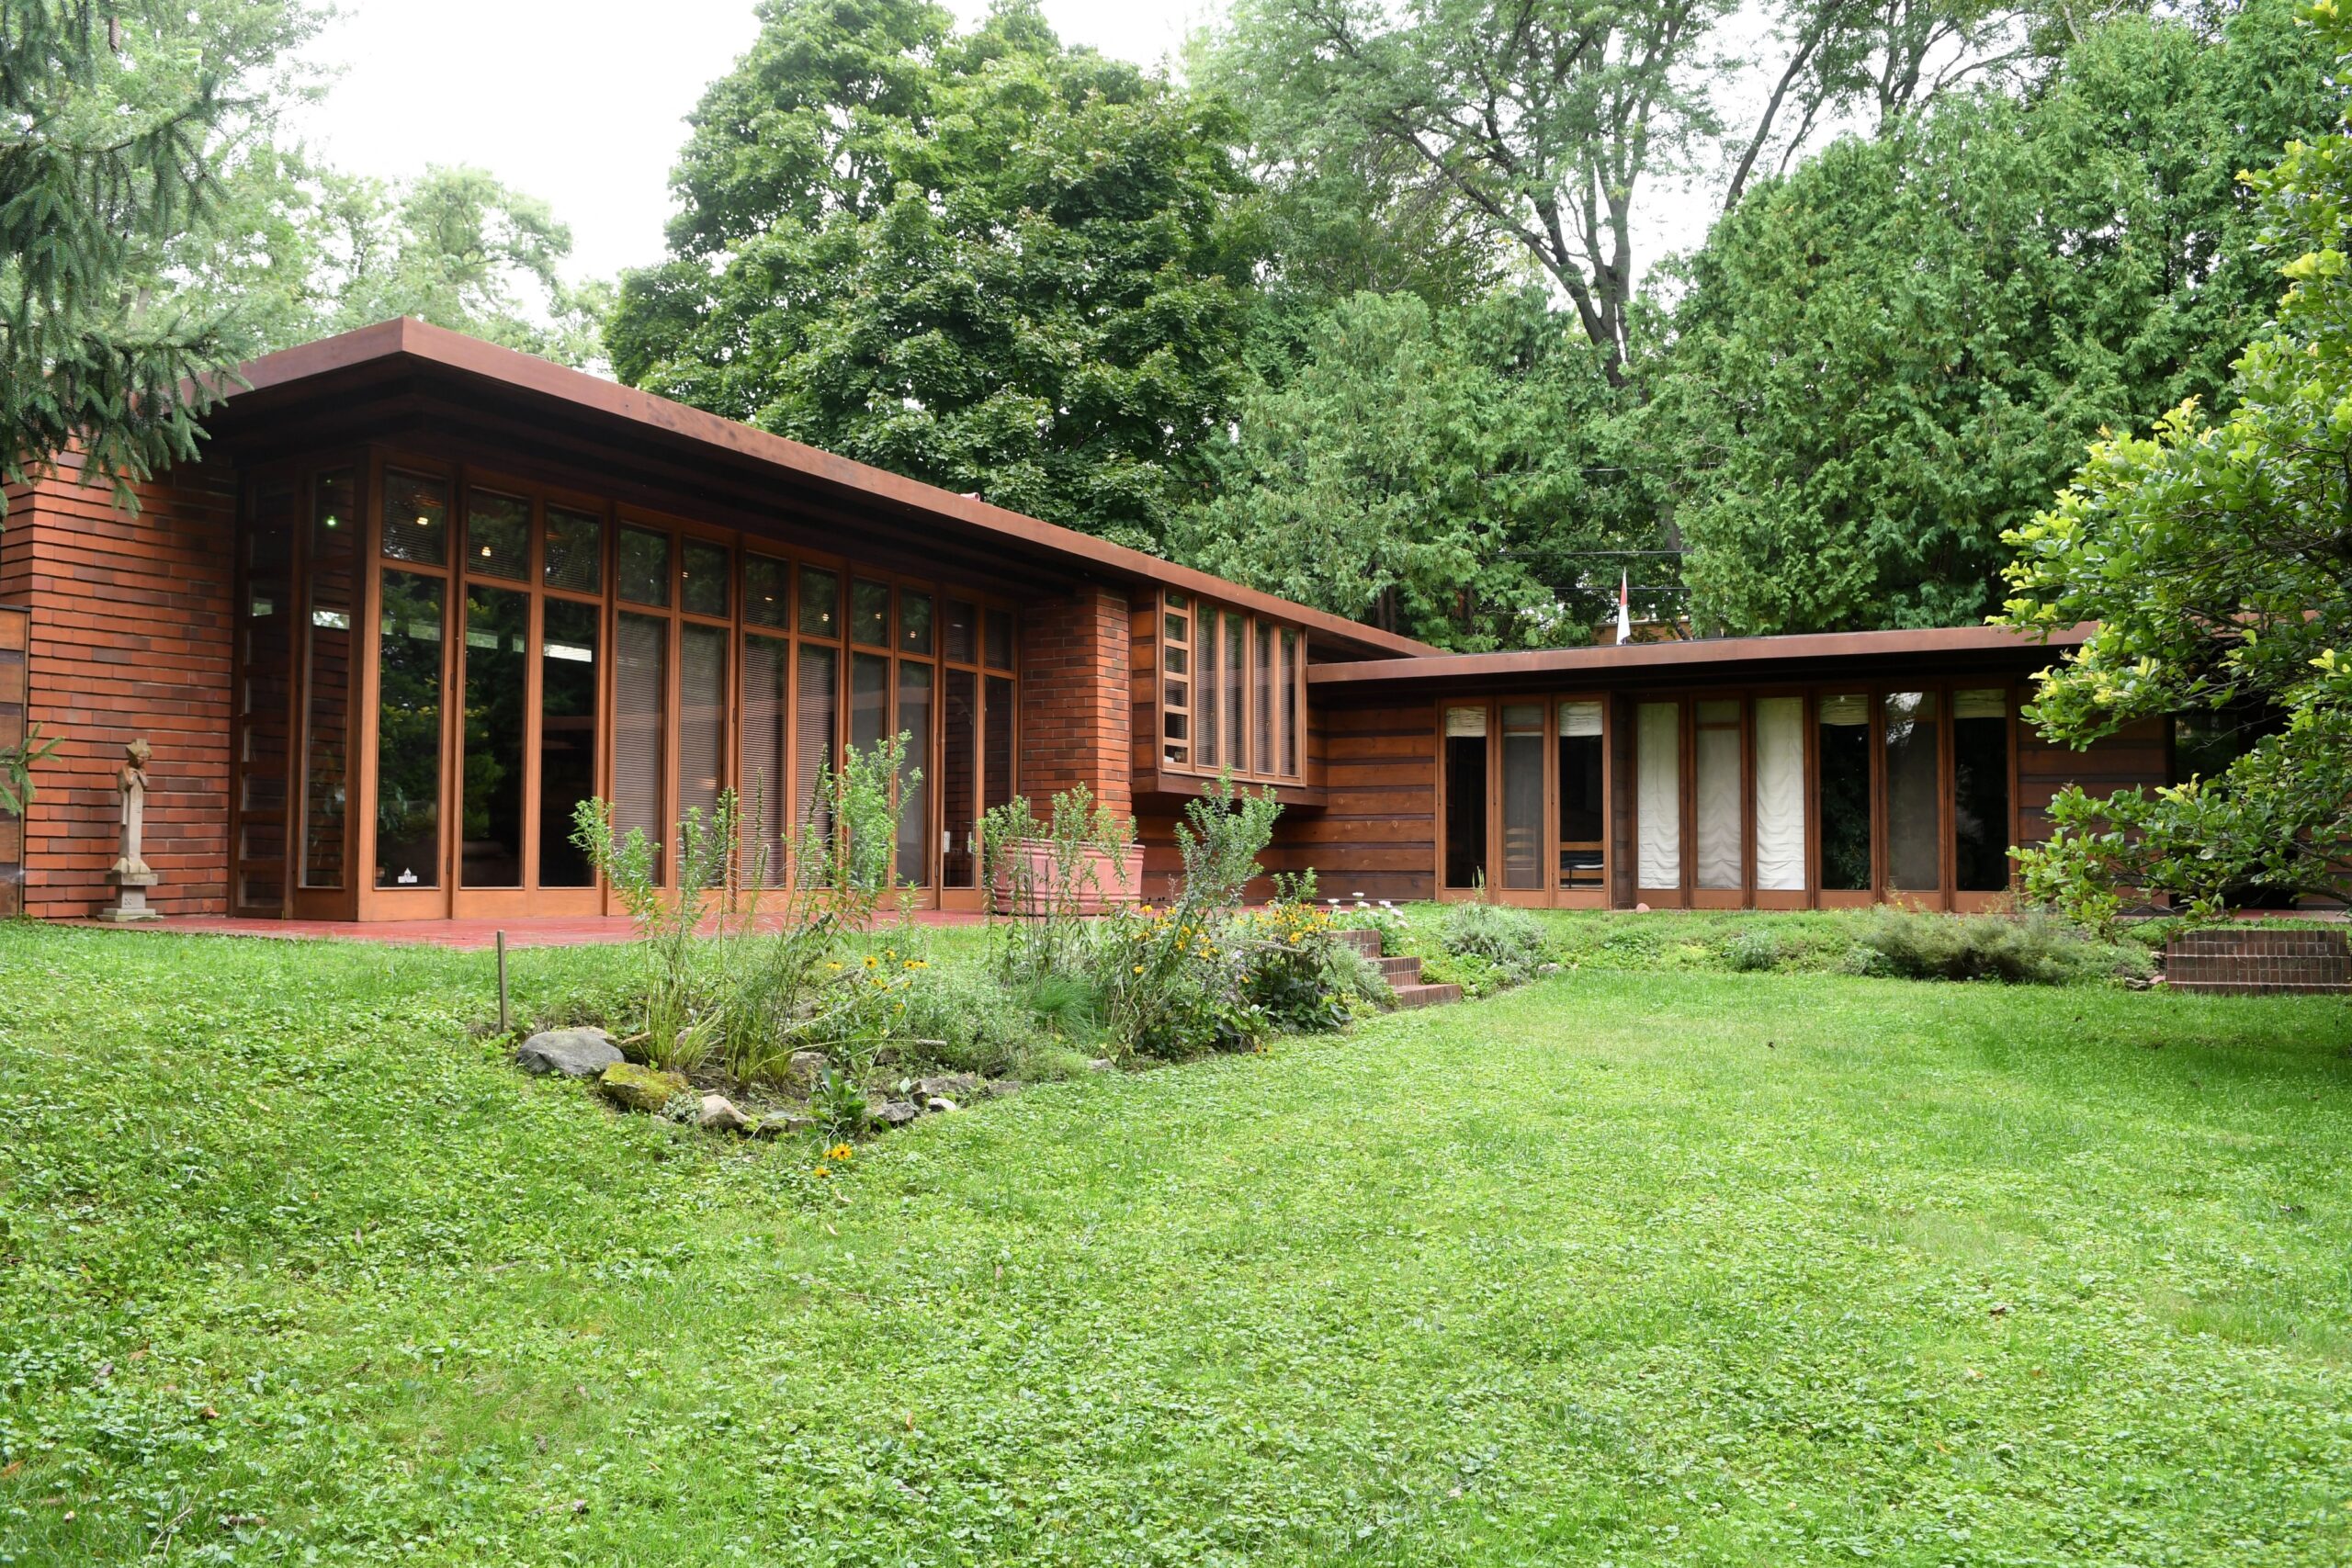 Stakeholders: Frank Lloyd Wright’s World Heritage List Designation Is A Triumph For Wisconsin